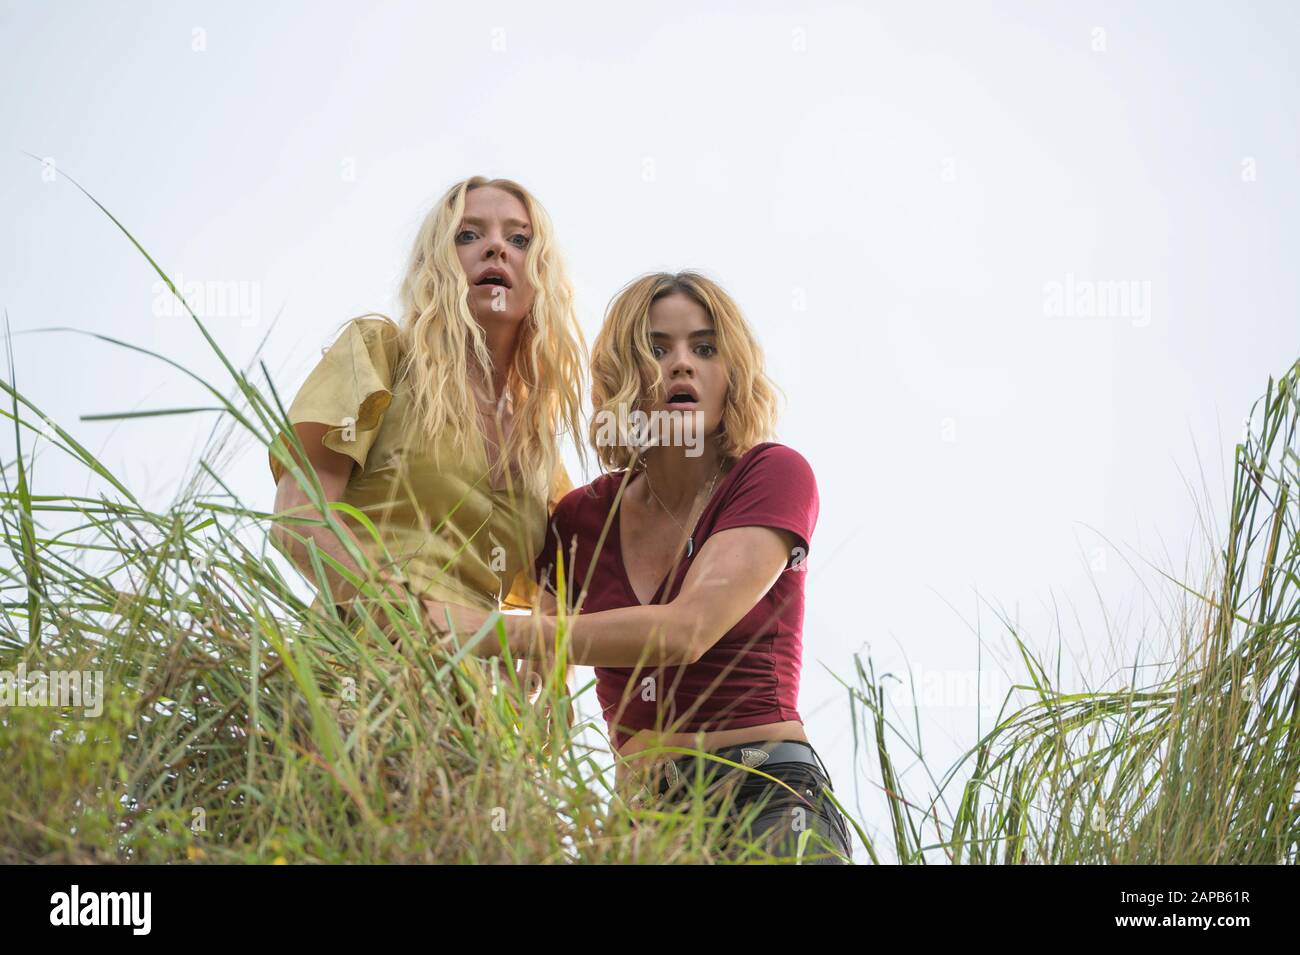 Portia Doubleday, Lucy Hale, 'Blumhouse’s Fantasy Island' (2020)  Credit: Christopher Moss / Sony Pictures / The Hollywood Archive Stock Photo